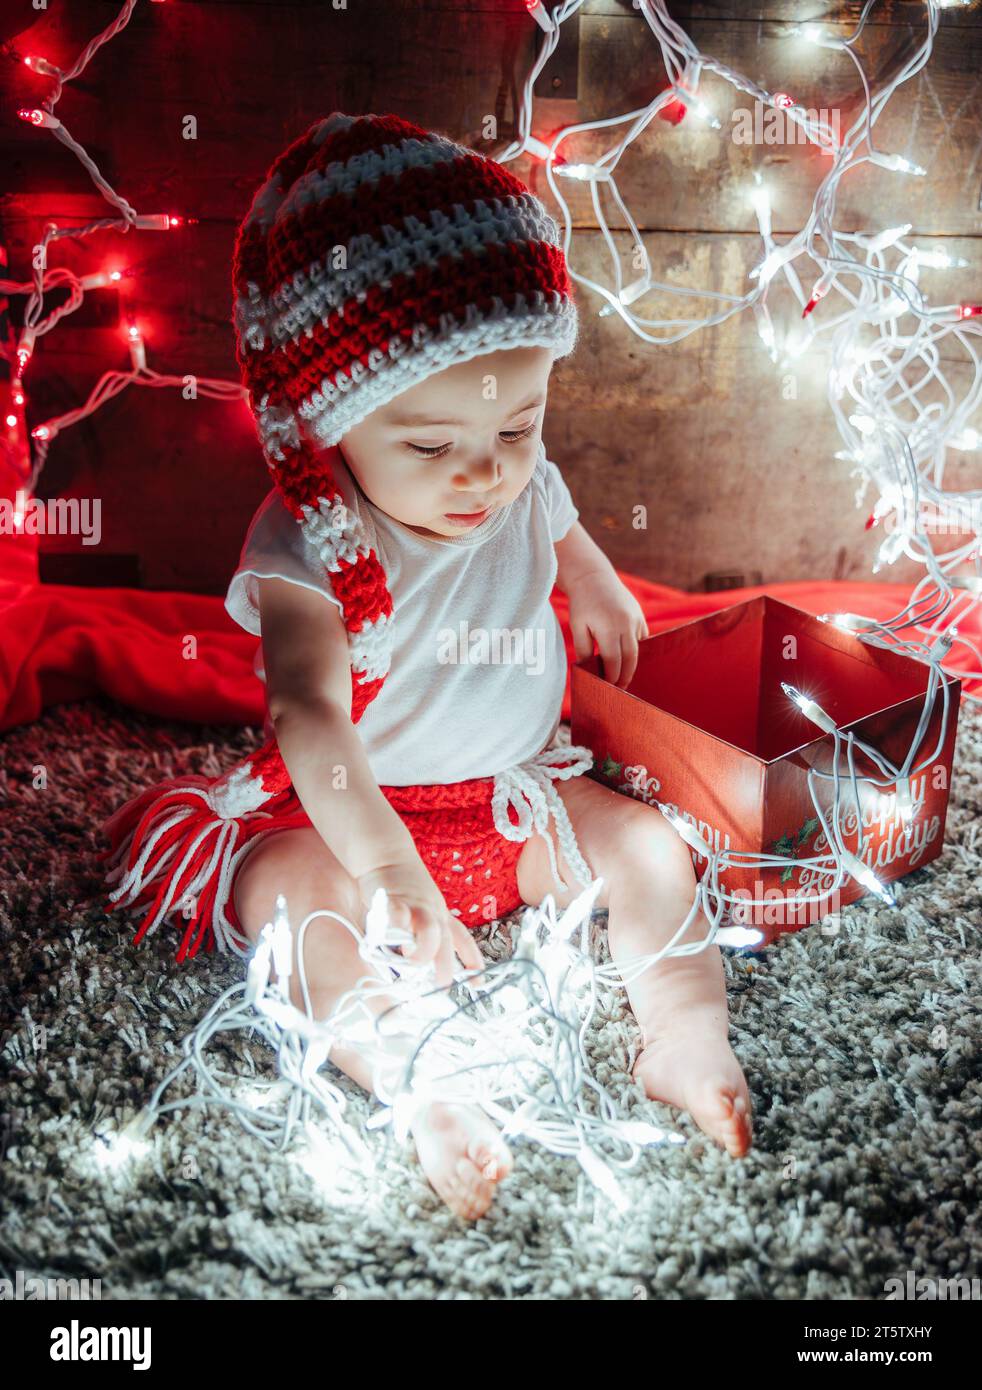 Child in Knit Hat Playing with Glowing Christmas Lights Stock Photo